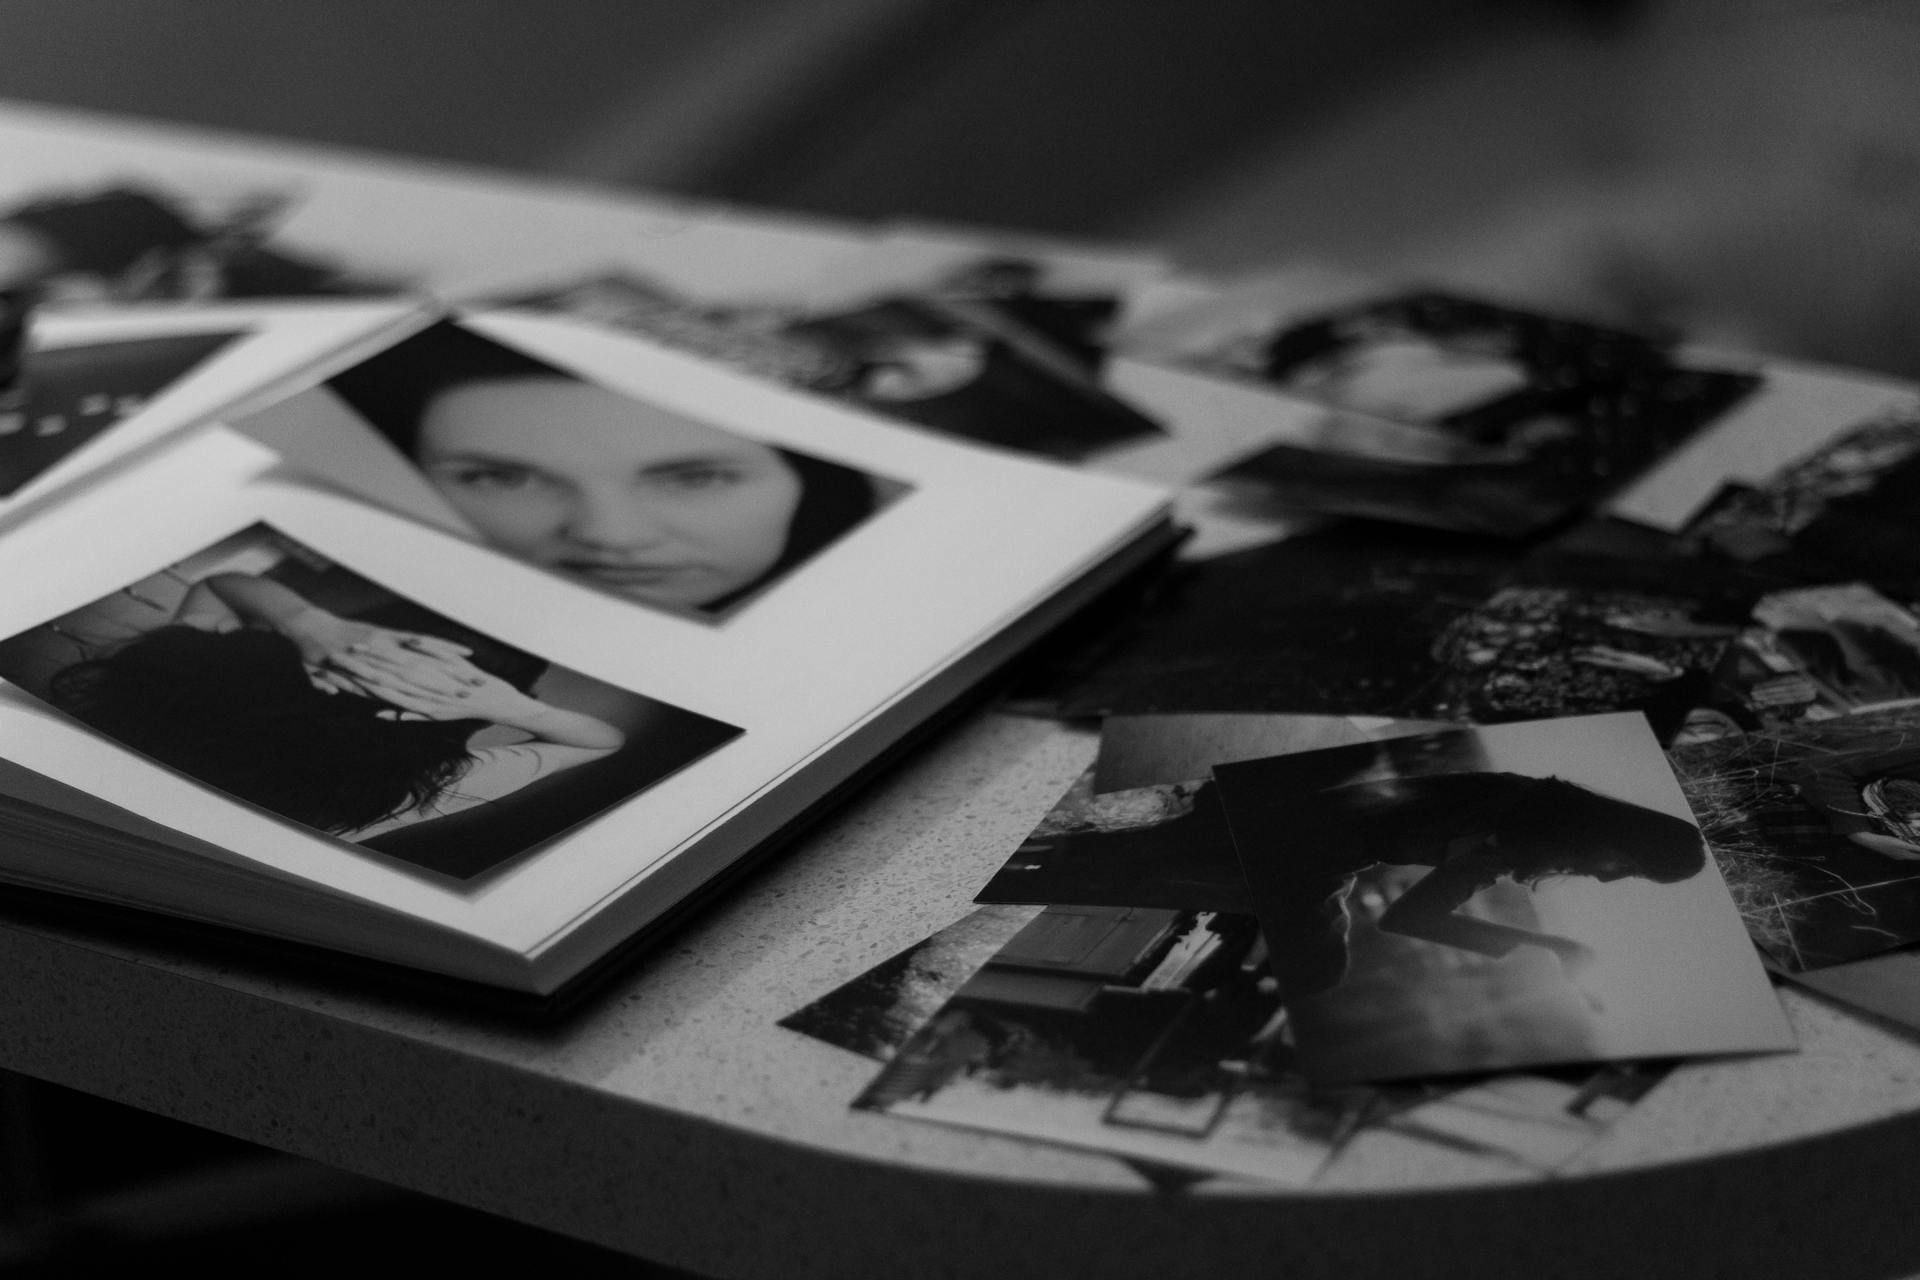 Photographs lying on a table | Source: Pexels